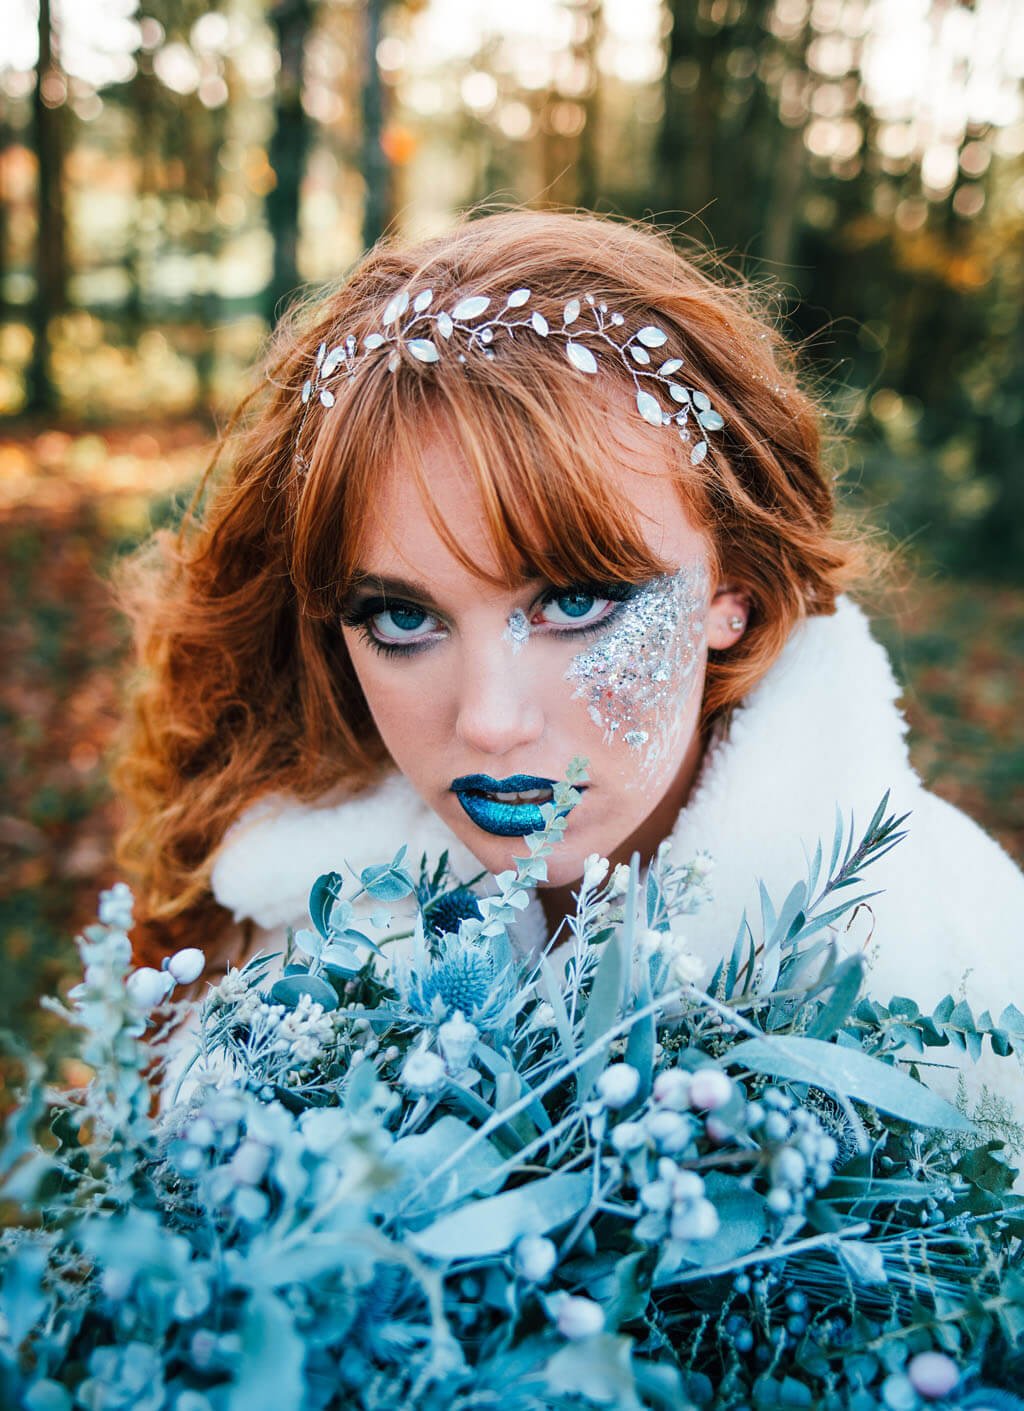 Ice Queen shoot in Cornwall - Photography by Arianna Fenton